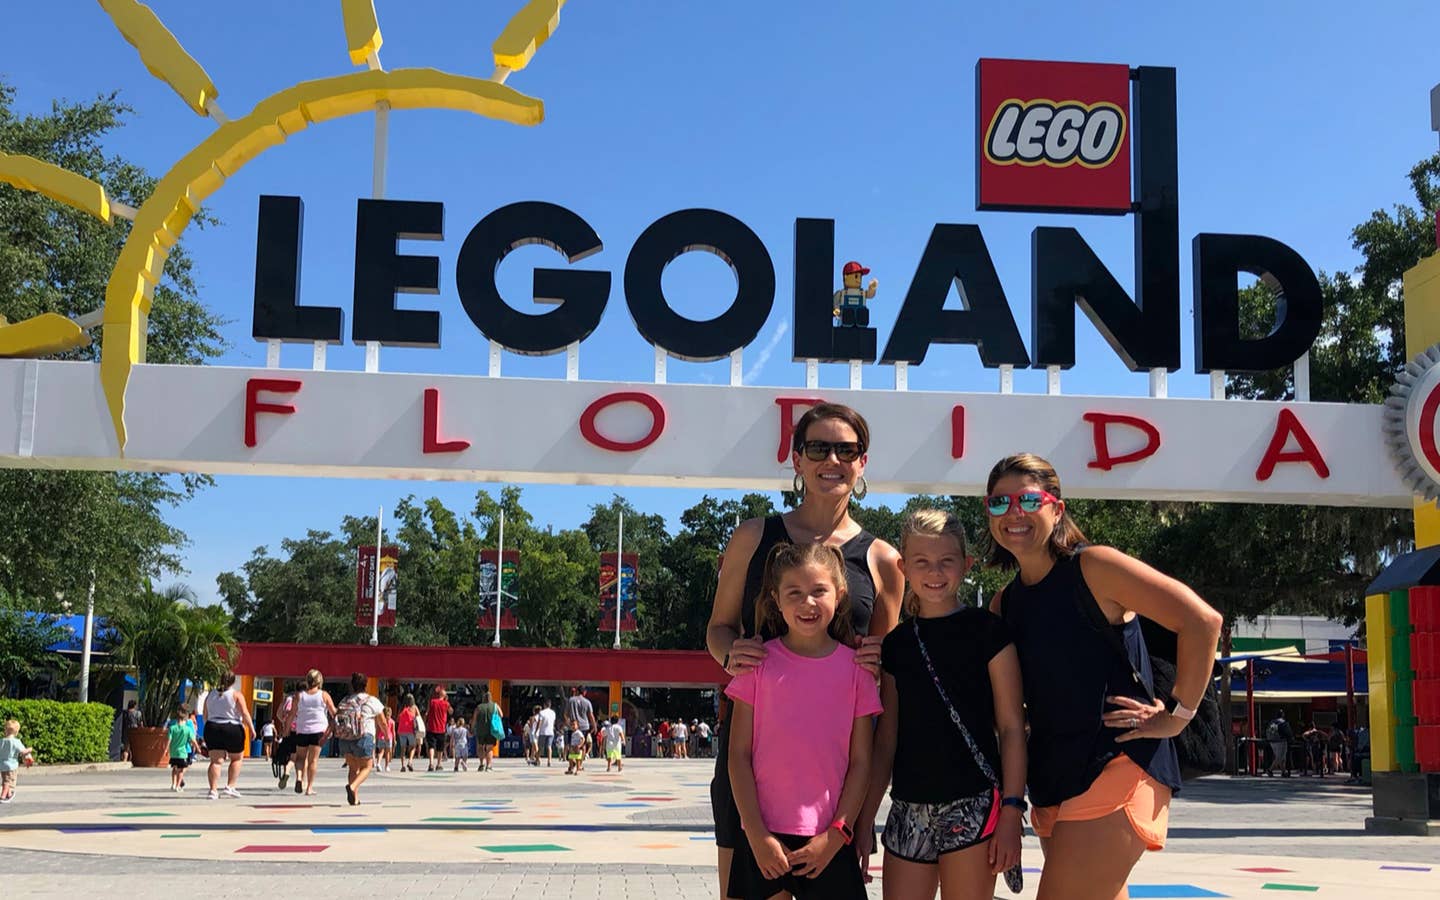 Two women (back) and two young girls (front) stand in front of a LEGOLAND sign in Orlando.